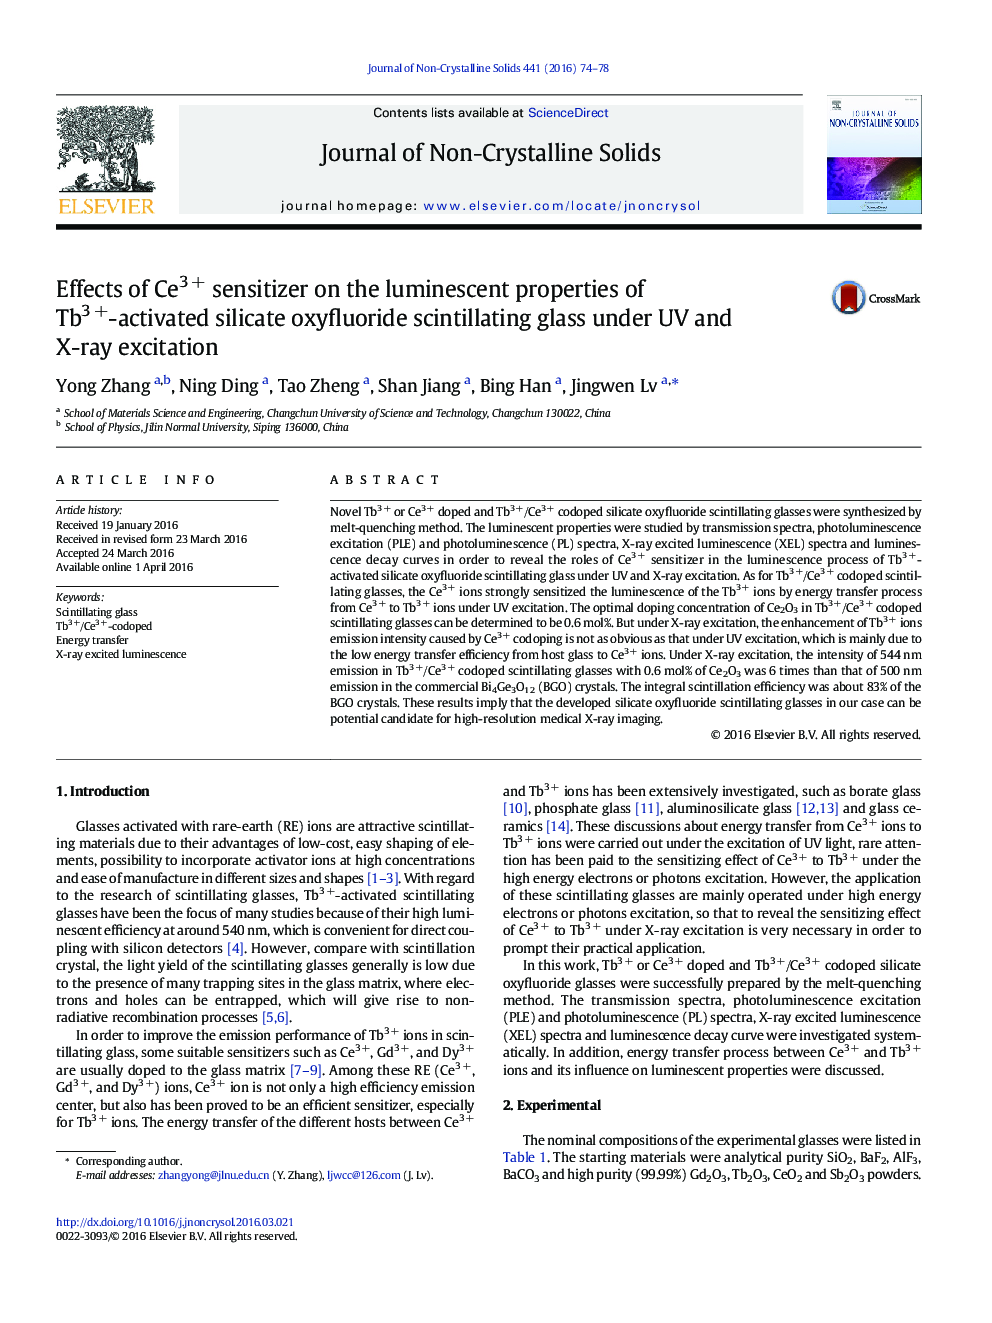 Effects of Ce3 + sensitizer on the luminescent properties of Tb3 +-activated silicate oxyfluoride scintillating glass under UV and X-ray excitation